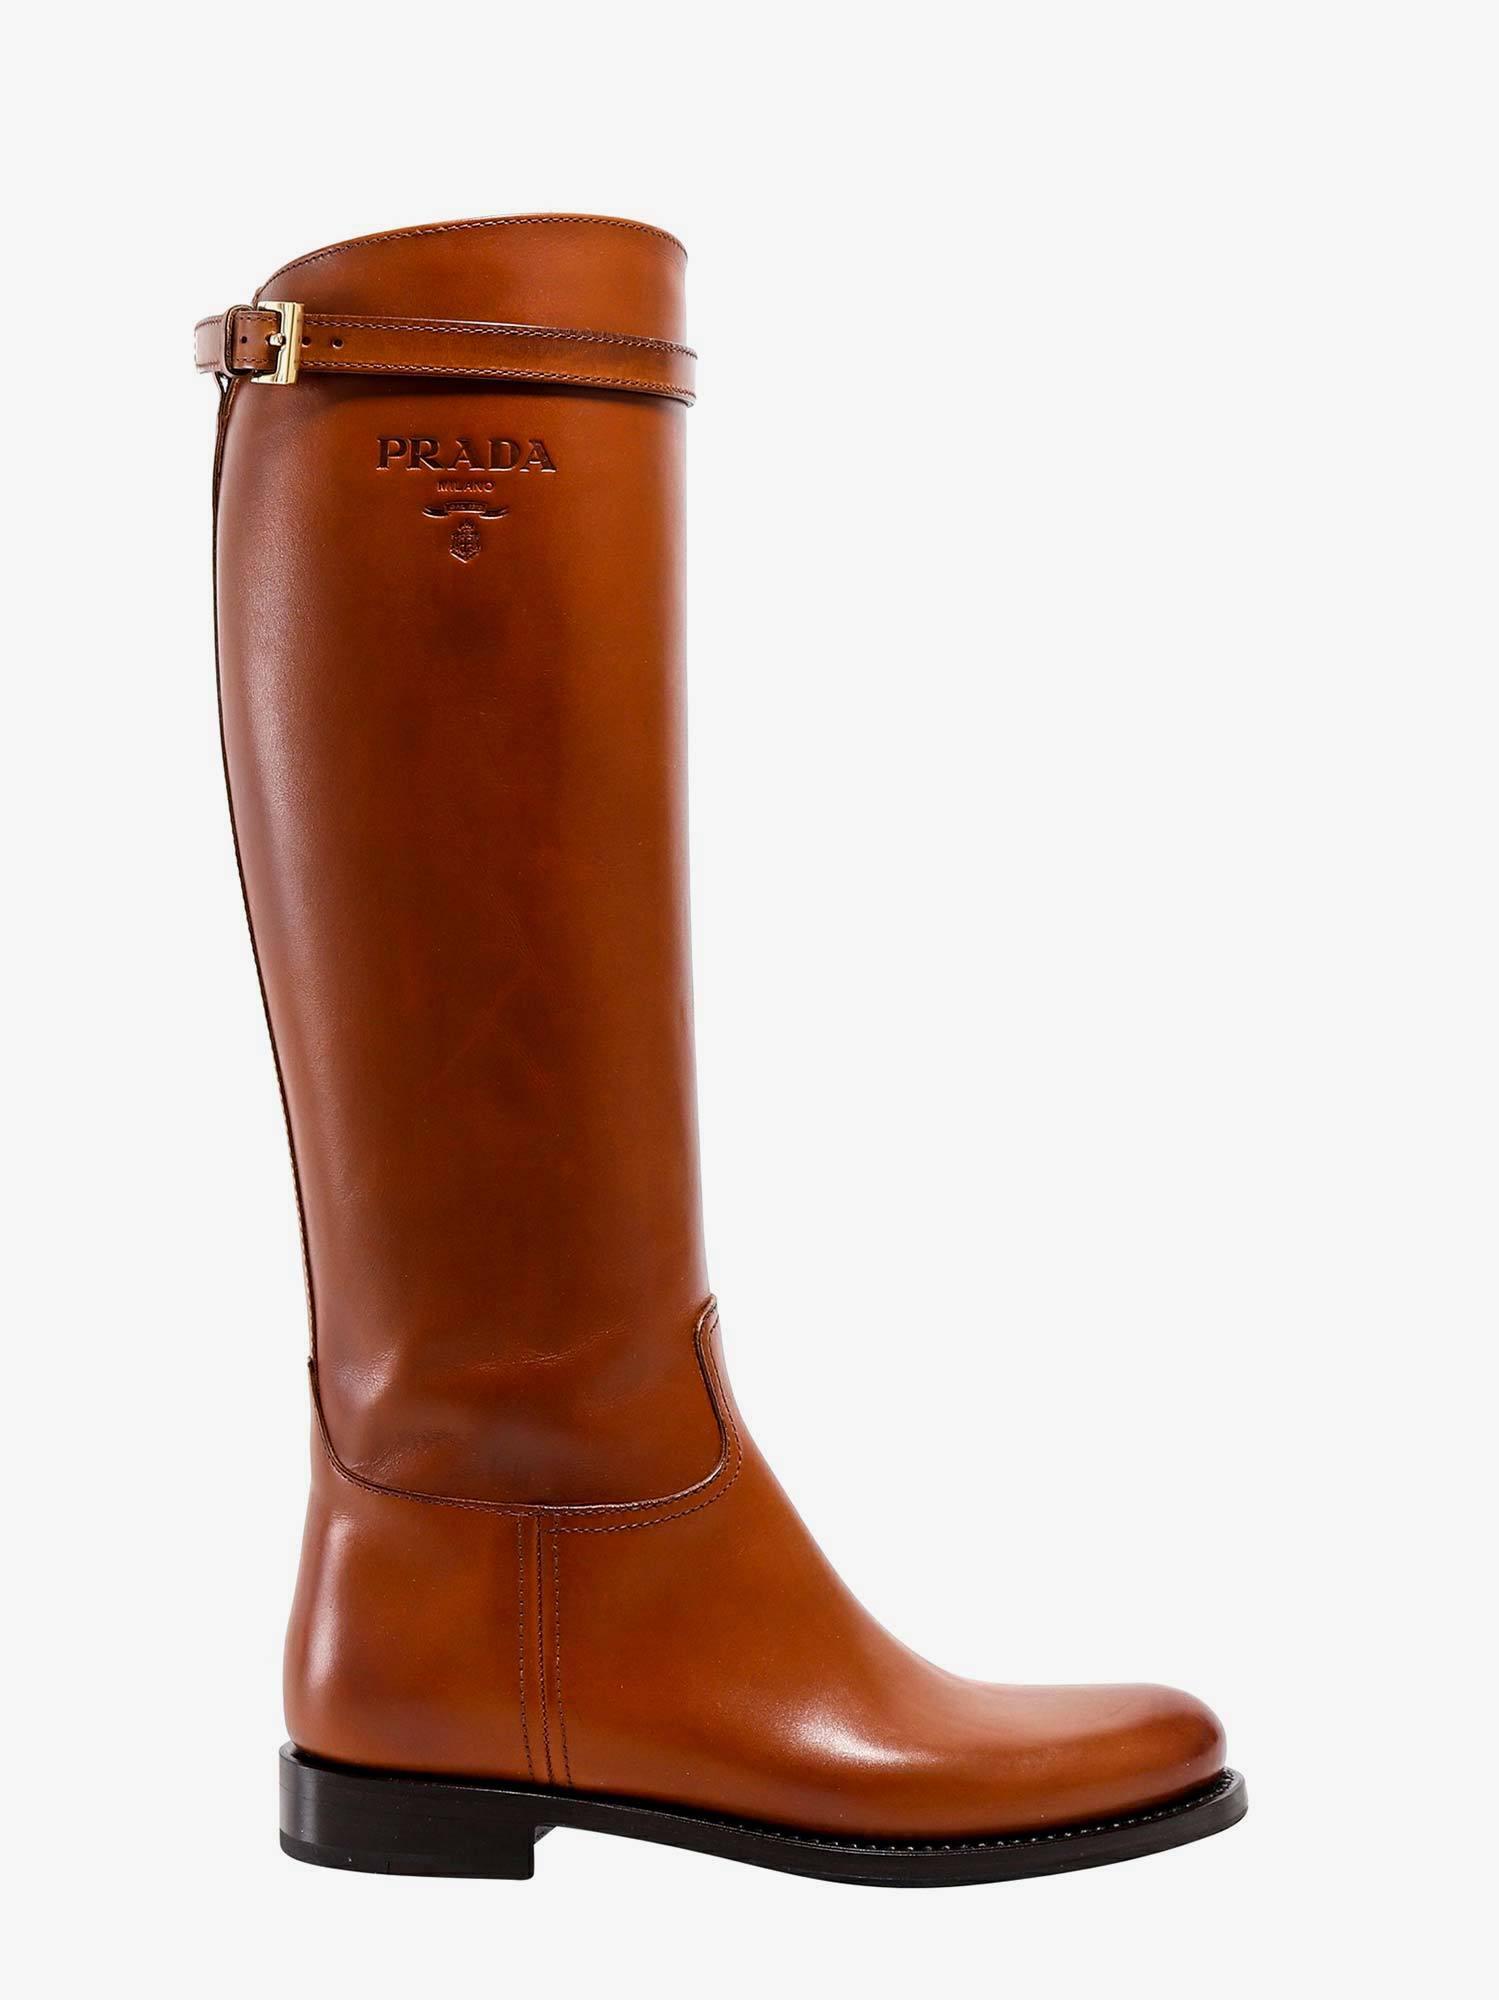 Prada Leather Boots in Brown - Save 31% - Lyst